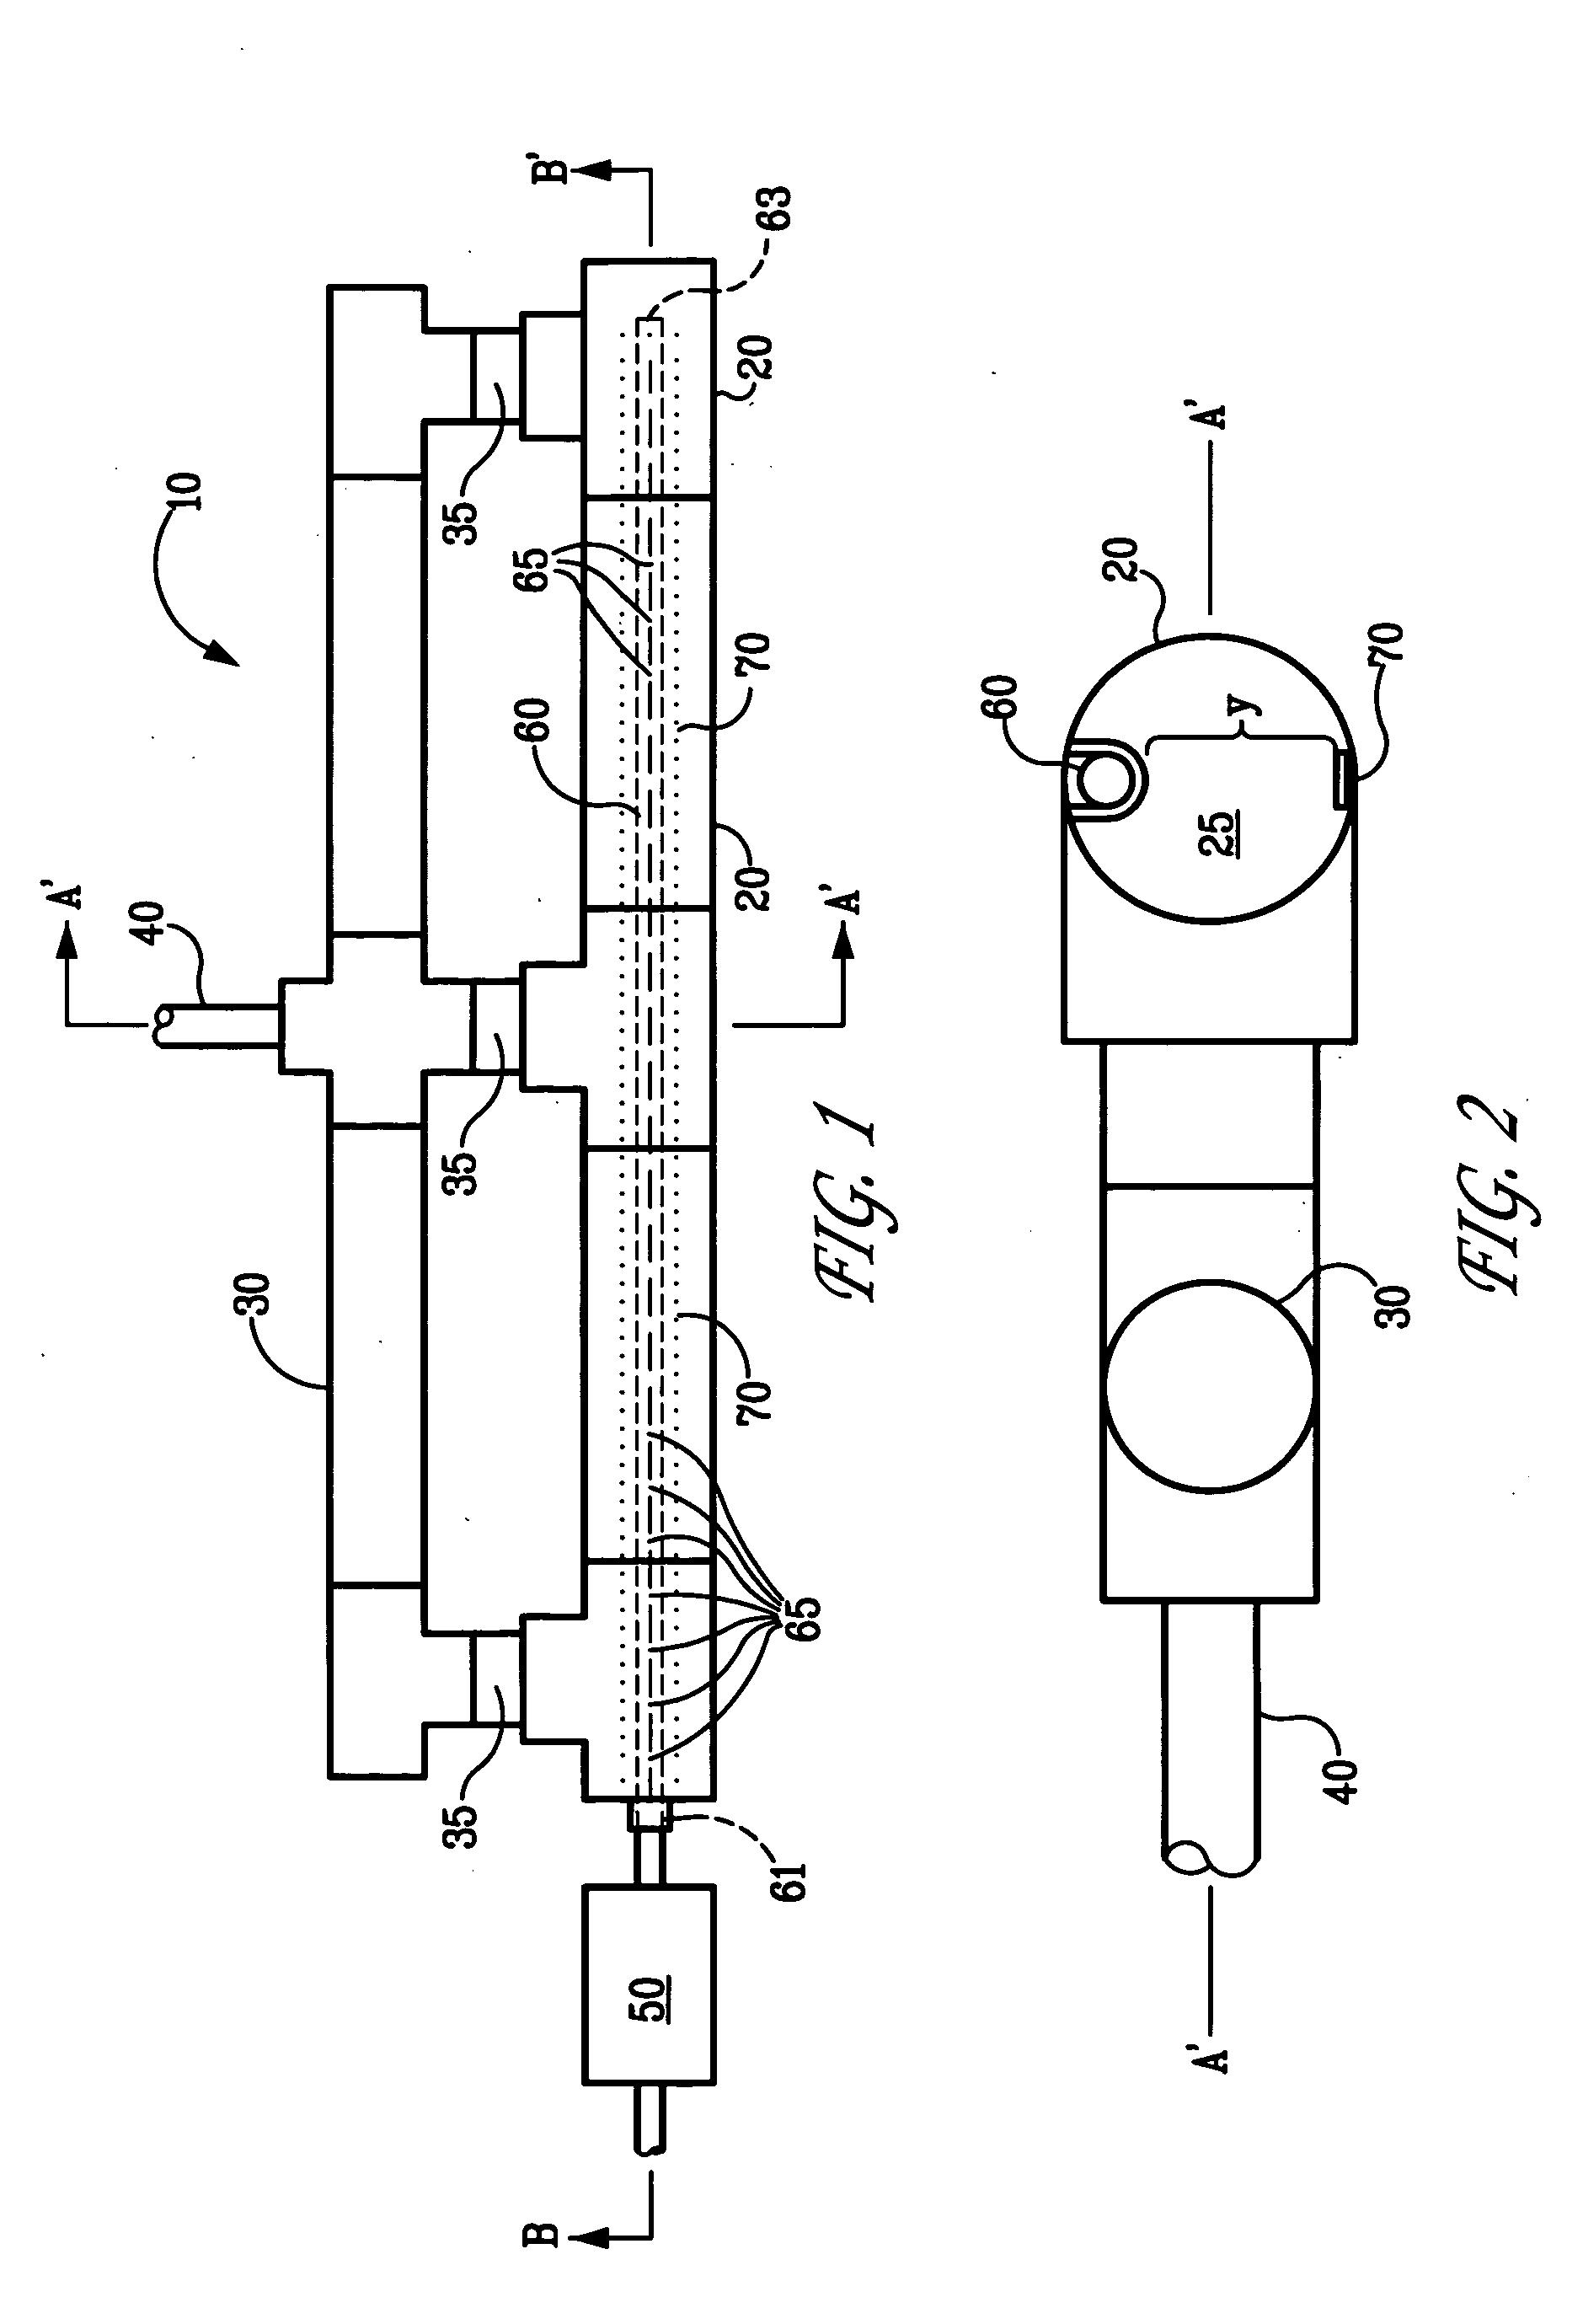 Apparatus and process for surface treatment of substrate using an activated reactive gas